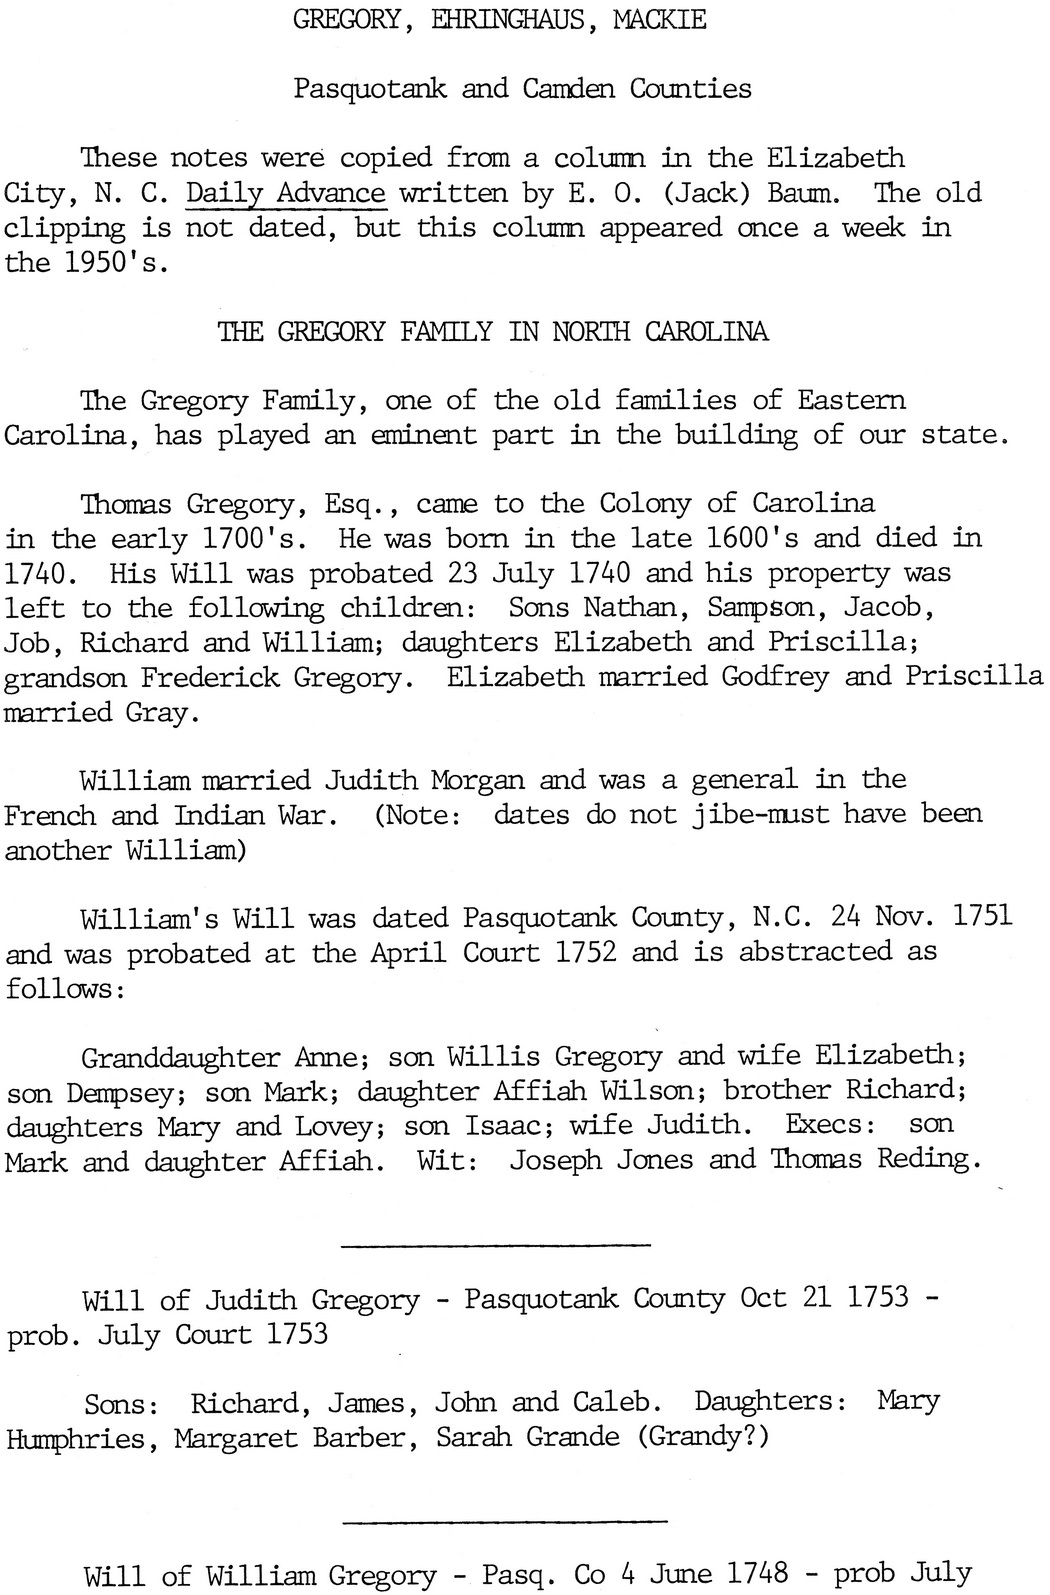 GREGORY - EHRINGHAUS - MACKIE Family Records - Pasq and Camden NC - 1